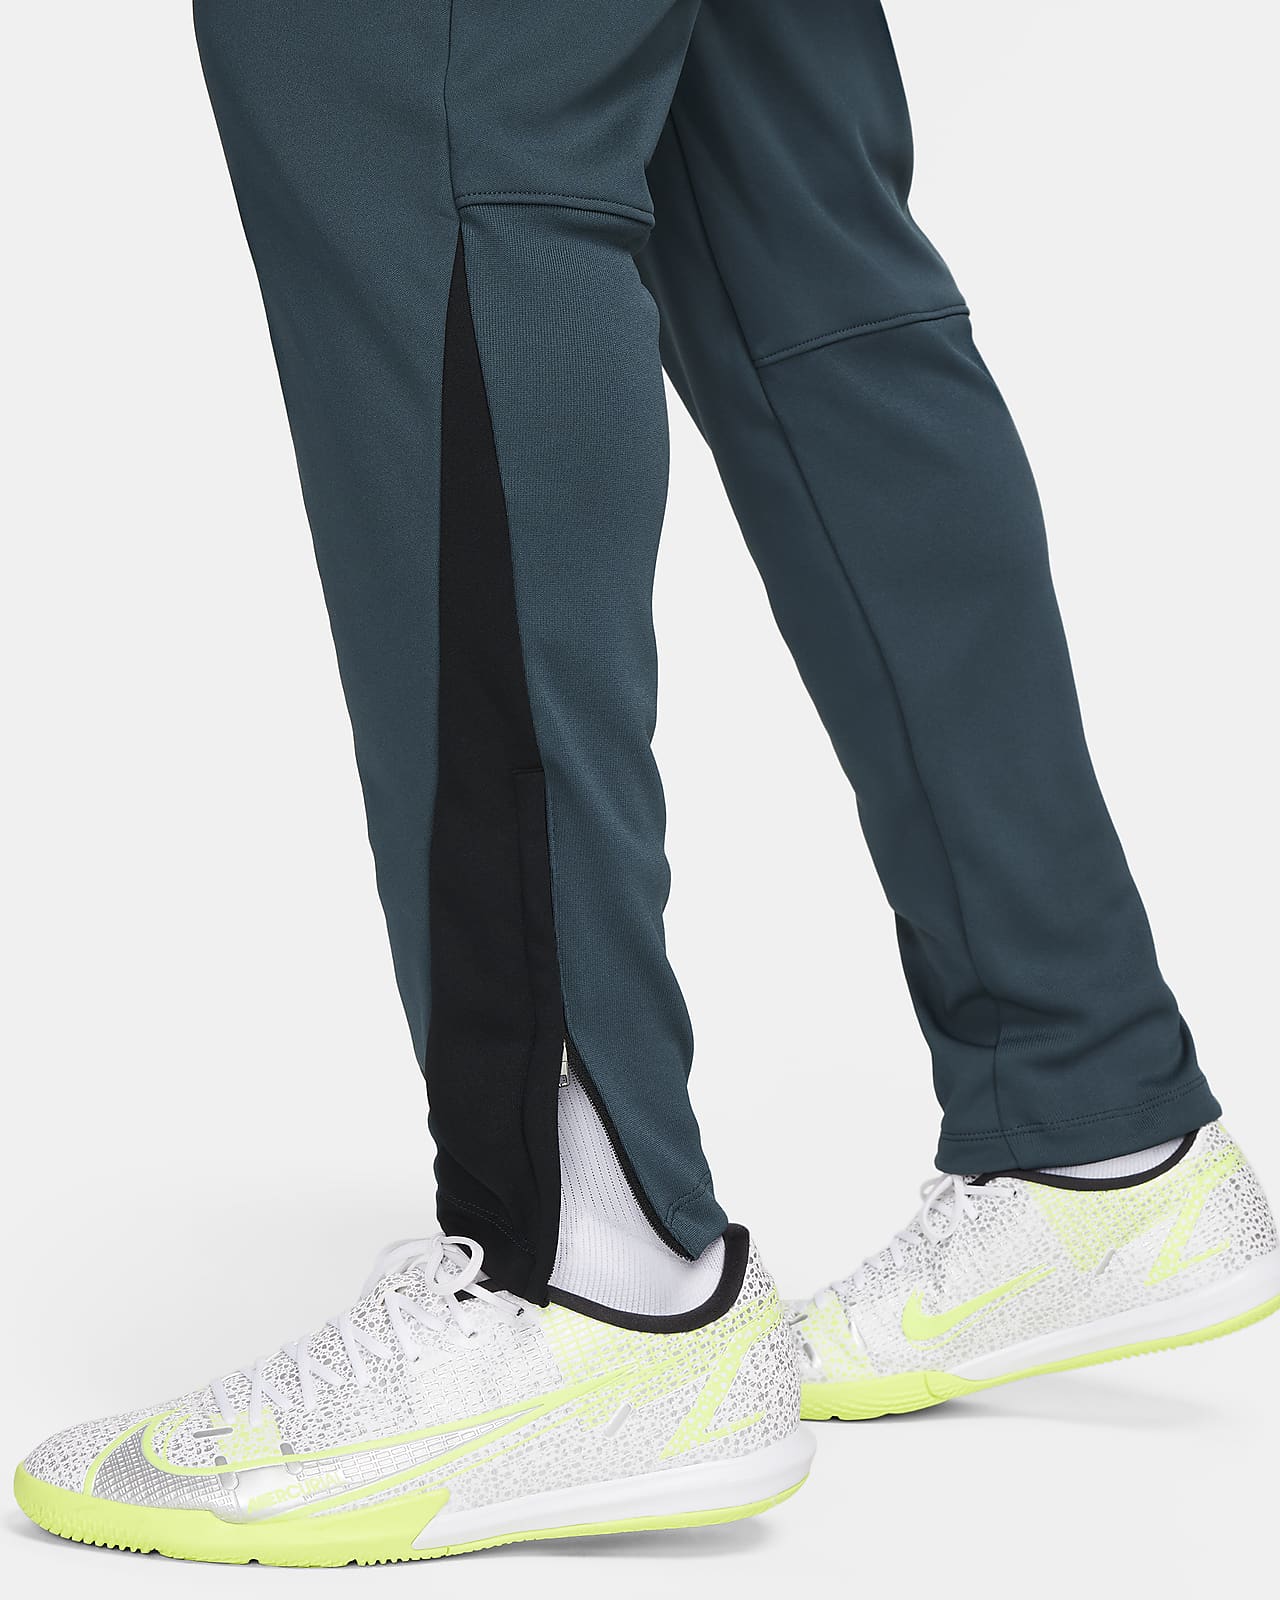 Nike Therma-FIT Academy Winter Warrior Pants Men - Blue Void/Volt